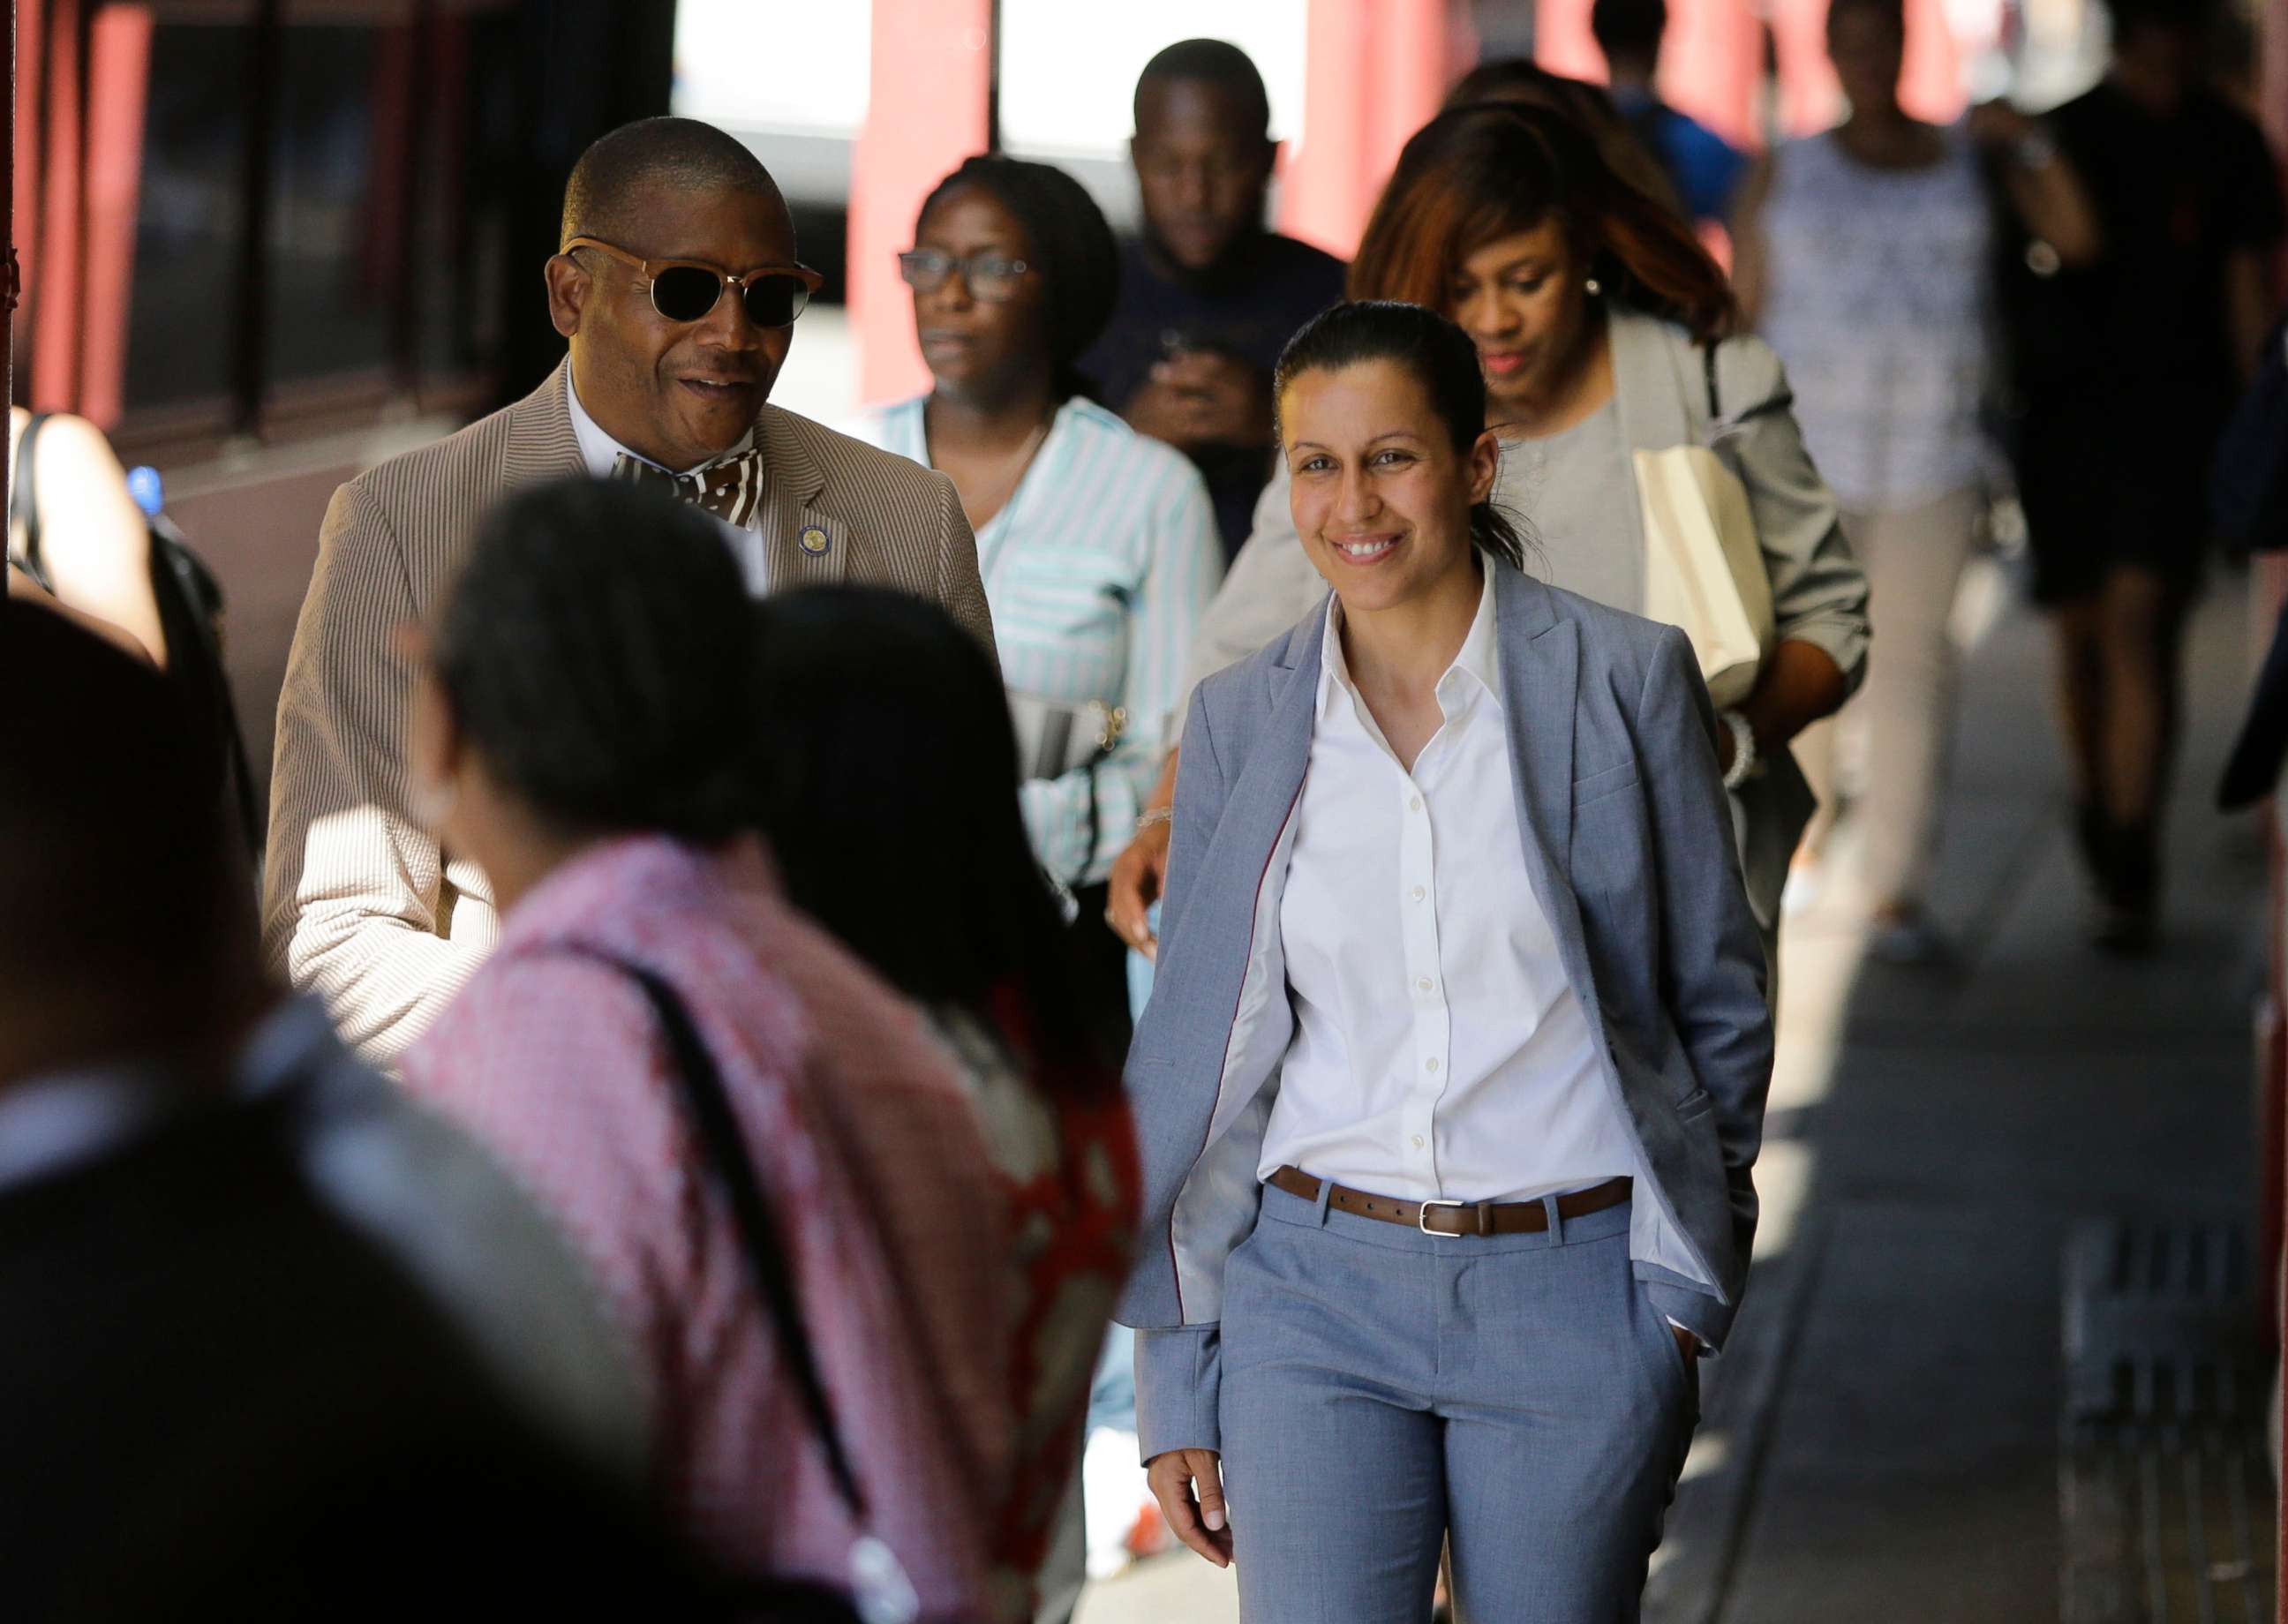 PHOTO: Queens district attorney candidate Tiffany Caban walks among commuters Wednesday, June 26, 2019, in the Queens borough of New York